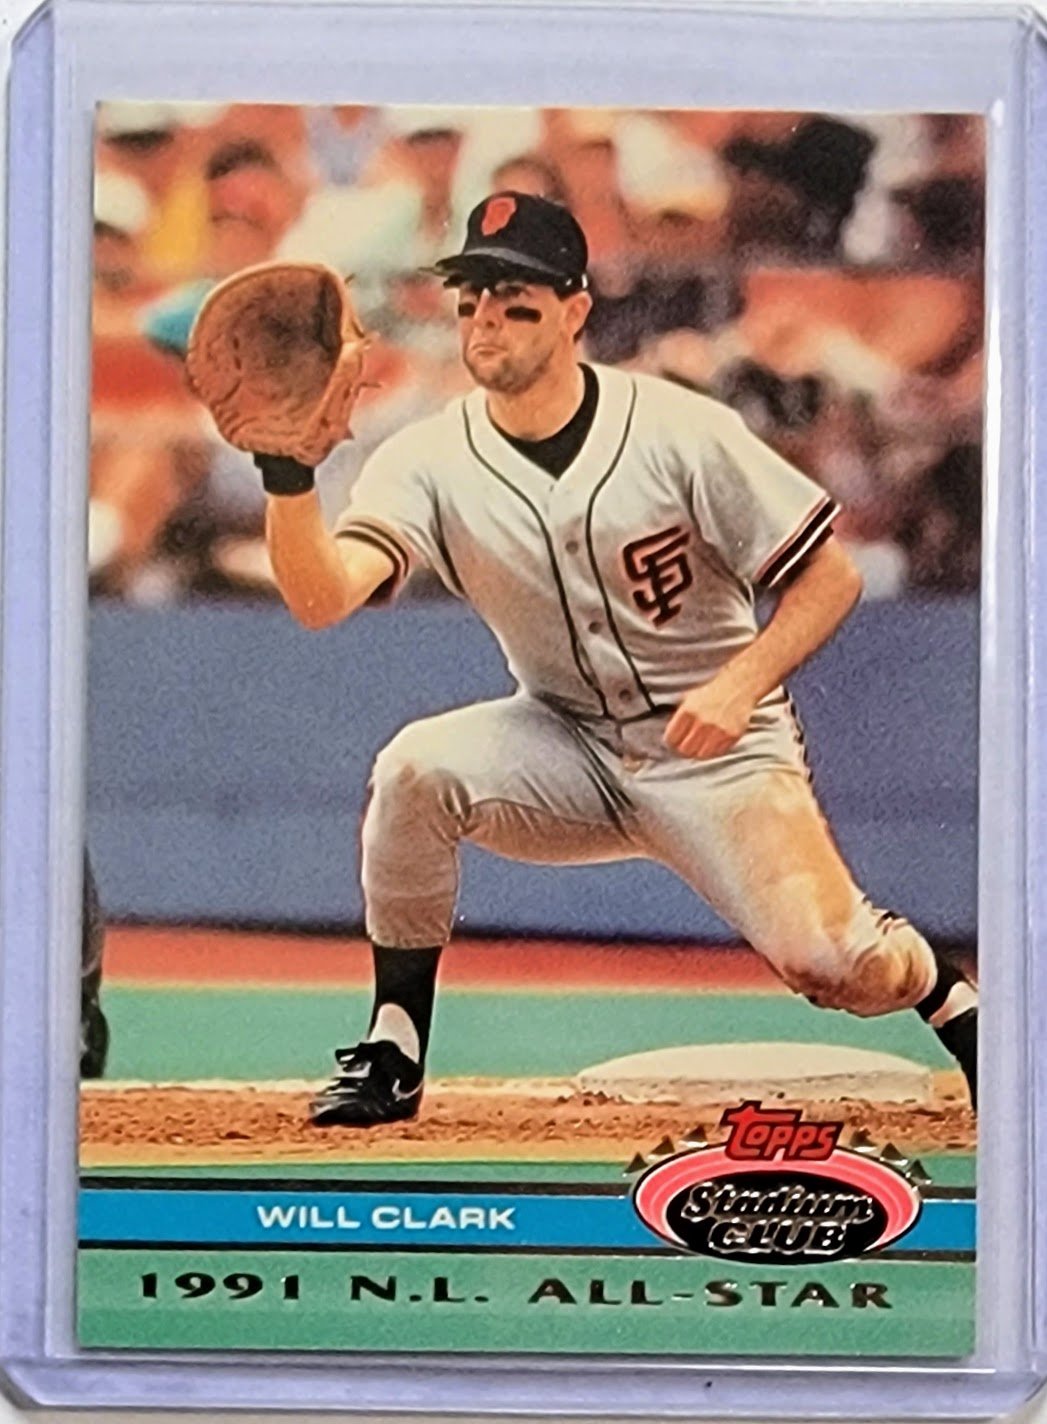 1992 Topps Stadium Club Dome Will Clark 1991 All Star MLB Baseball Trading Card TPTV simple Xclusive Collectibles   